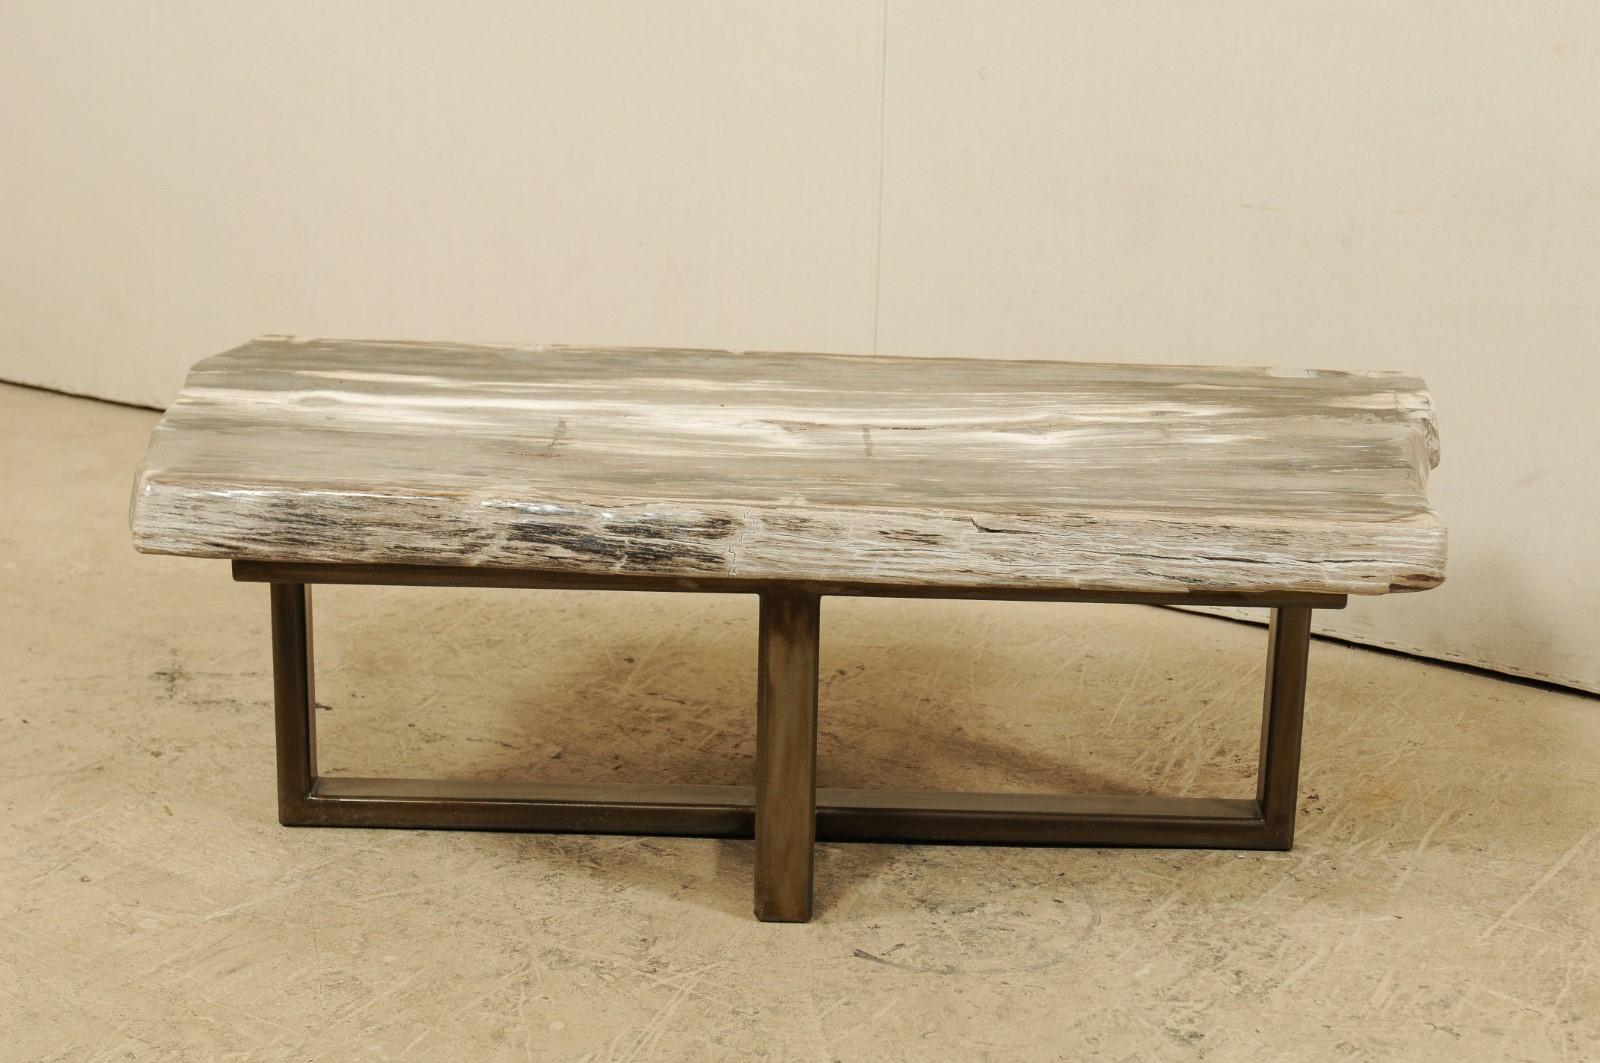 Carved Petrified Wood Slab Bench or Coffee Table with Modern Base